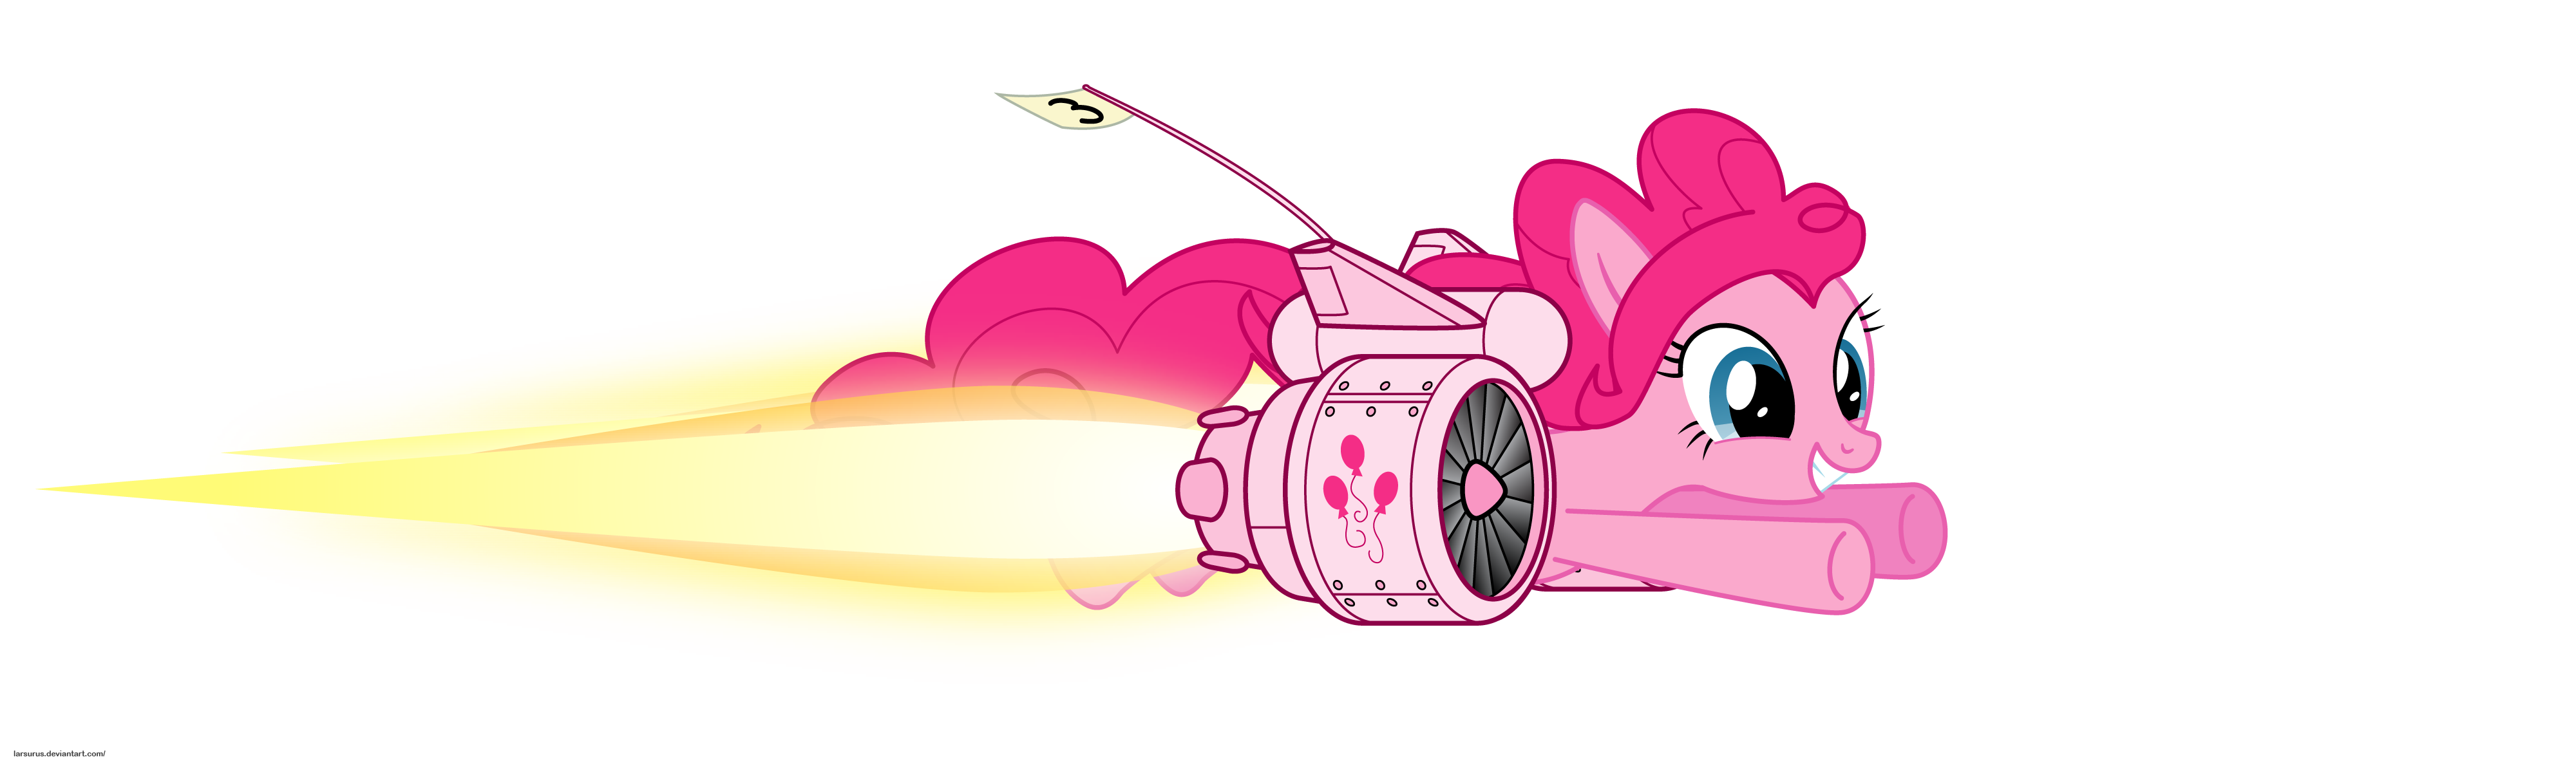 [Bild: pinkie_pie_on_the_fly___png_by_larsurus-d4dxnth.png]